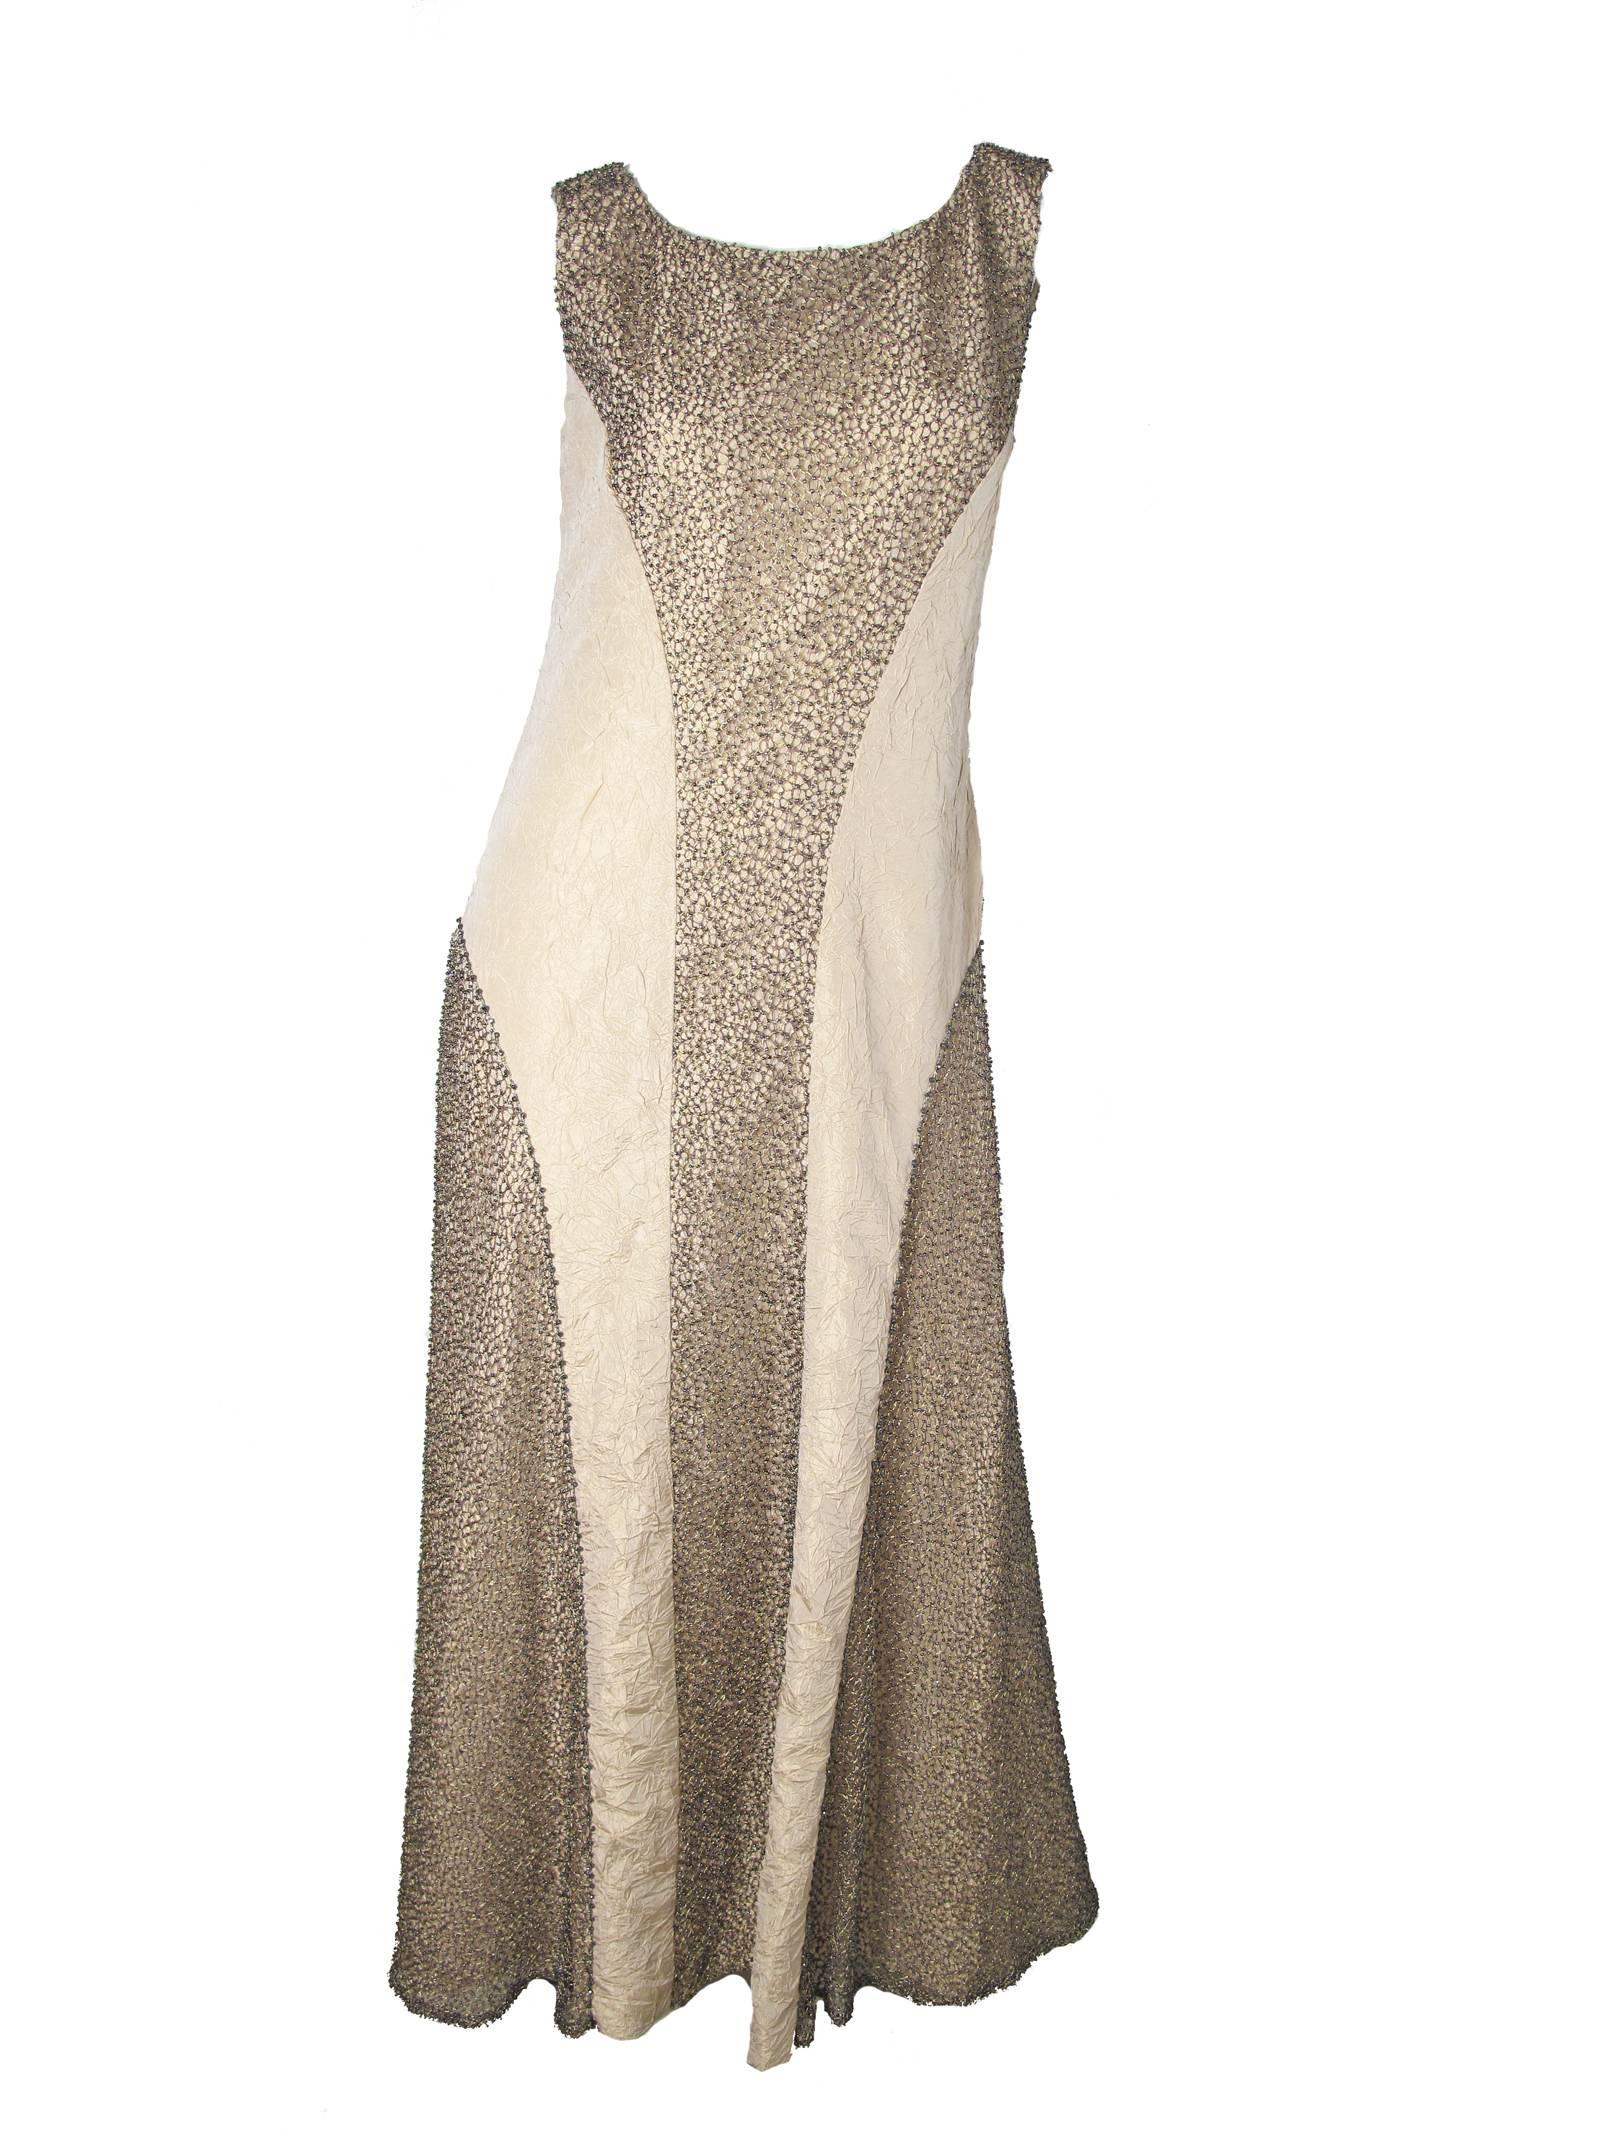 Chanel evening gown with metallic thread and beading c. 2000.  Condition: Very good.  Acetate and silk fabric.  Size 40 /US 6- 8

We accept returns for refund, please see our terms.  We offer free ground shipping within the US.  Please let us know